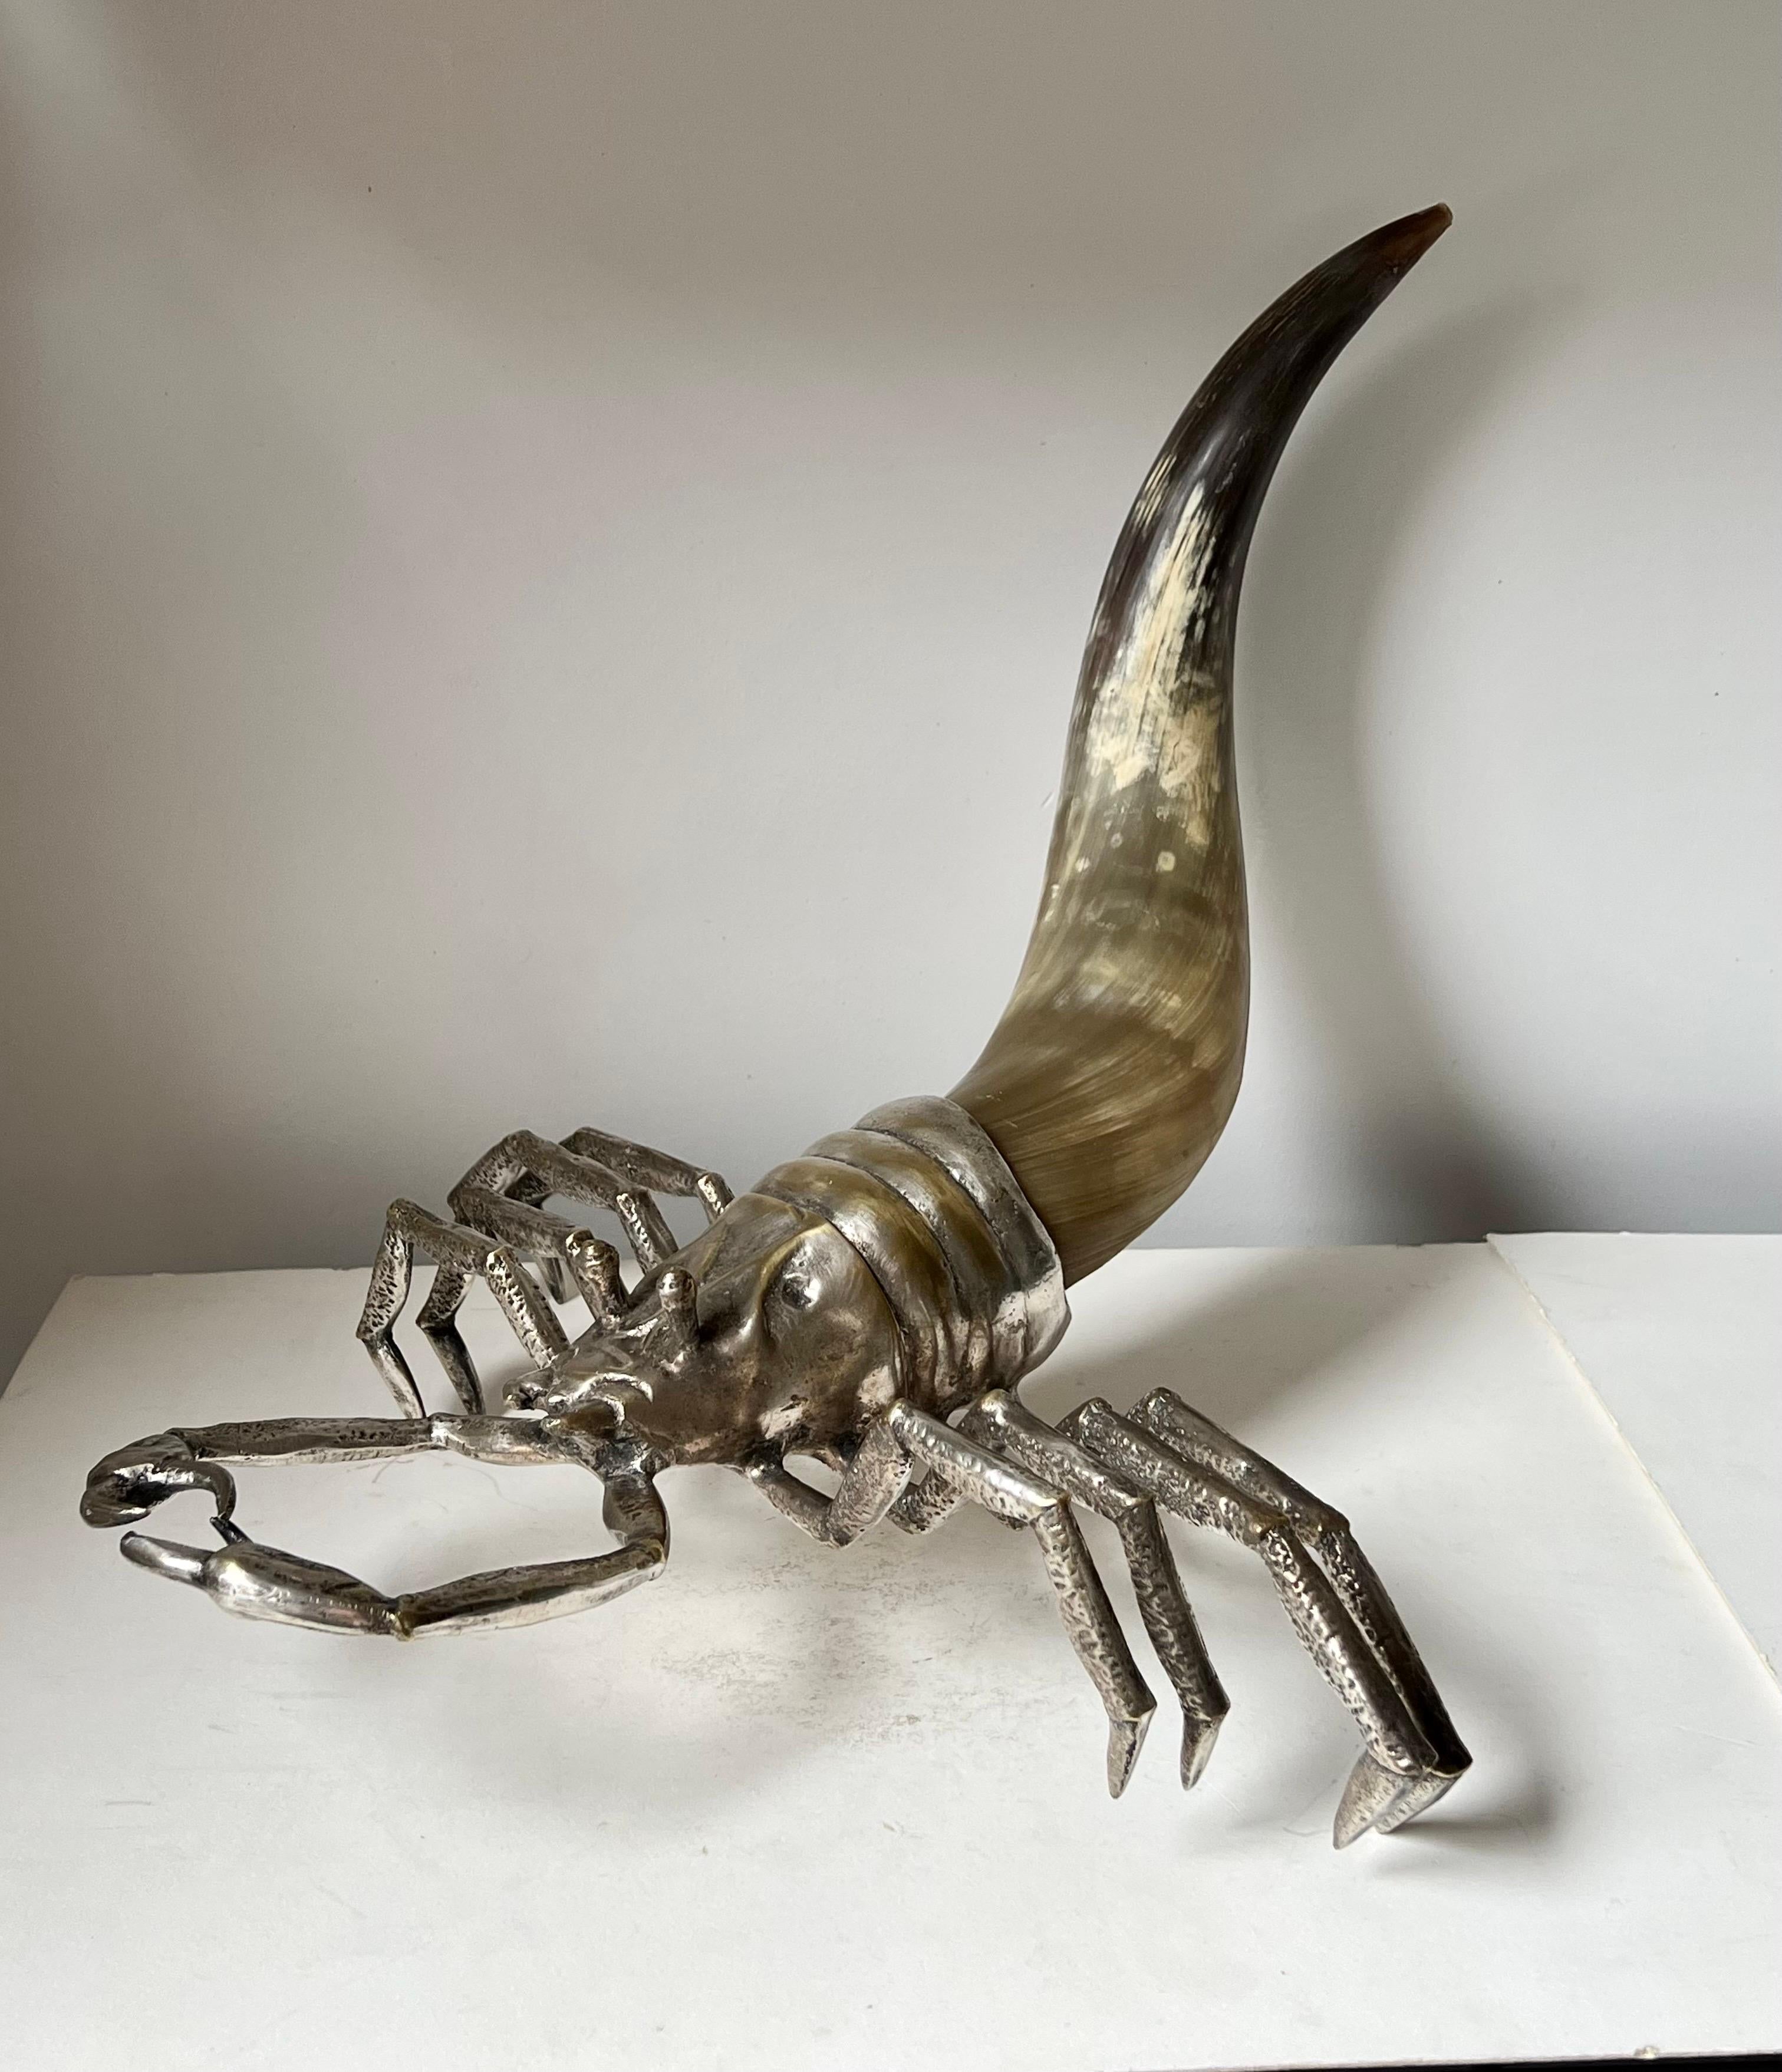 Silver plated and horn Scorpion sculpture circa 1970’s. No markings. Very little wear. Silver plating over brass.